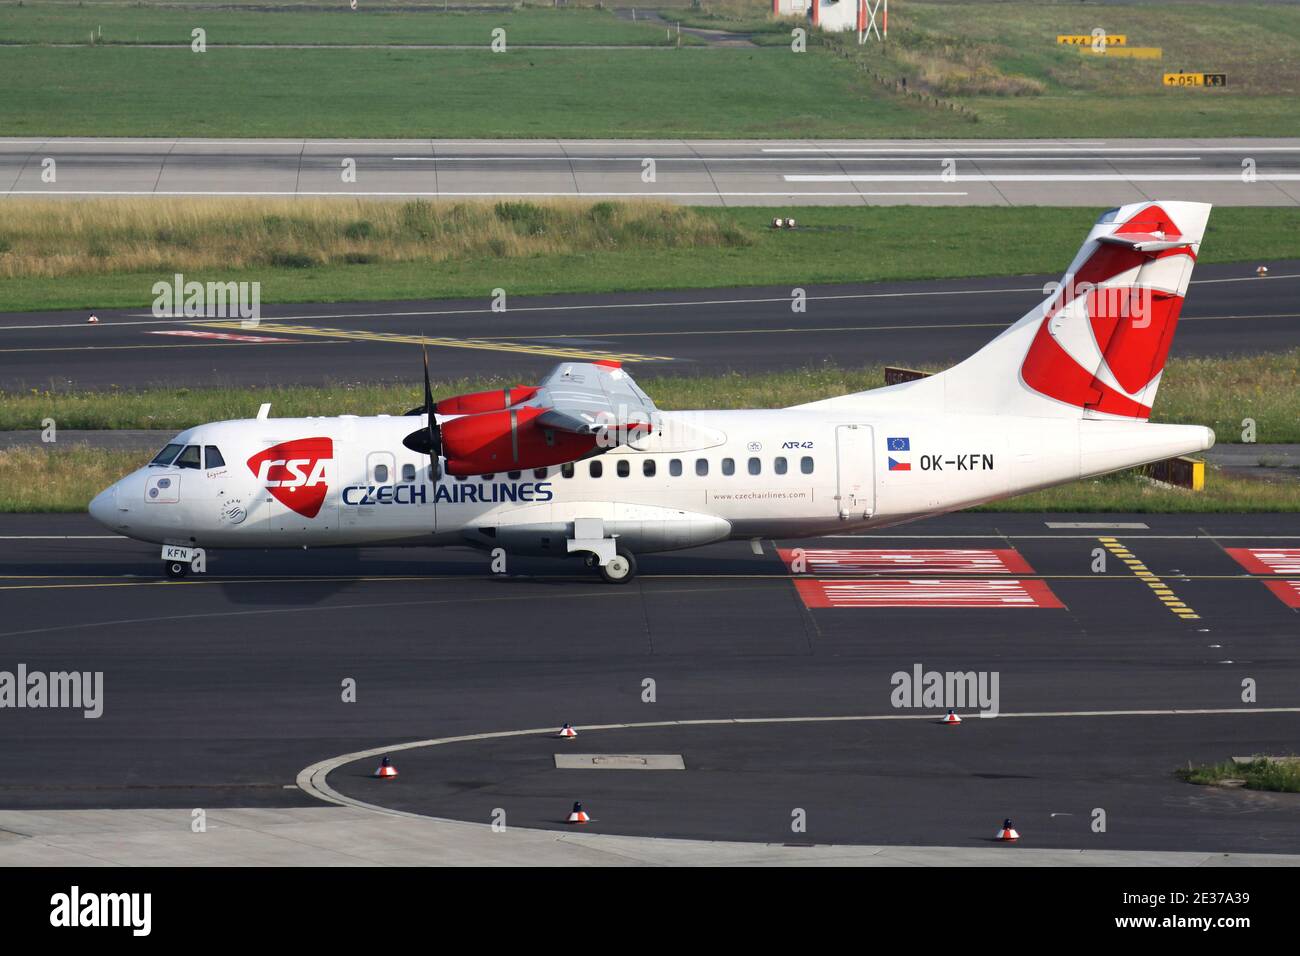 CSA Czech Airlines ATR 42 with registration OK-KFN on taxiway at Dusseldorf Airport. Stock Photo